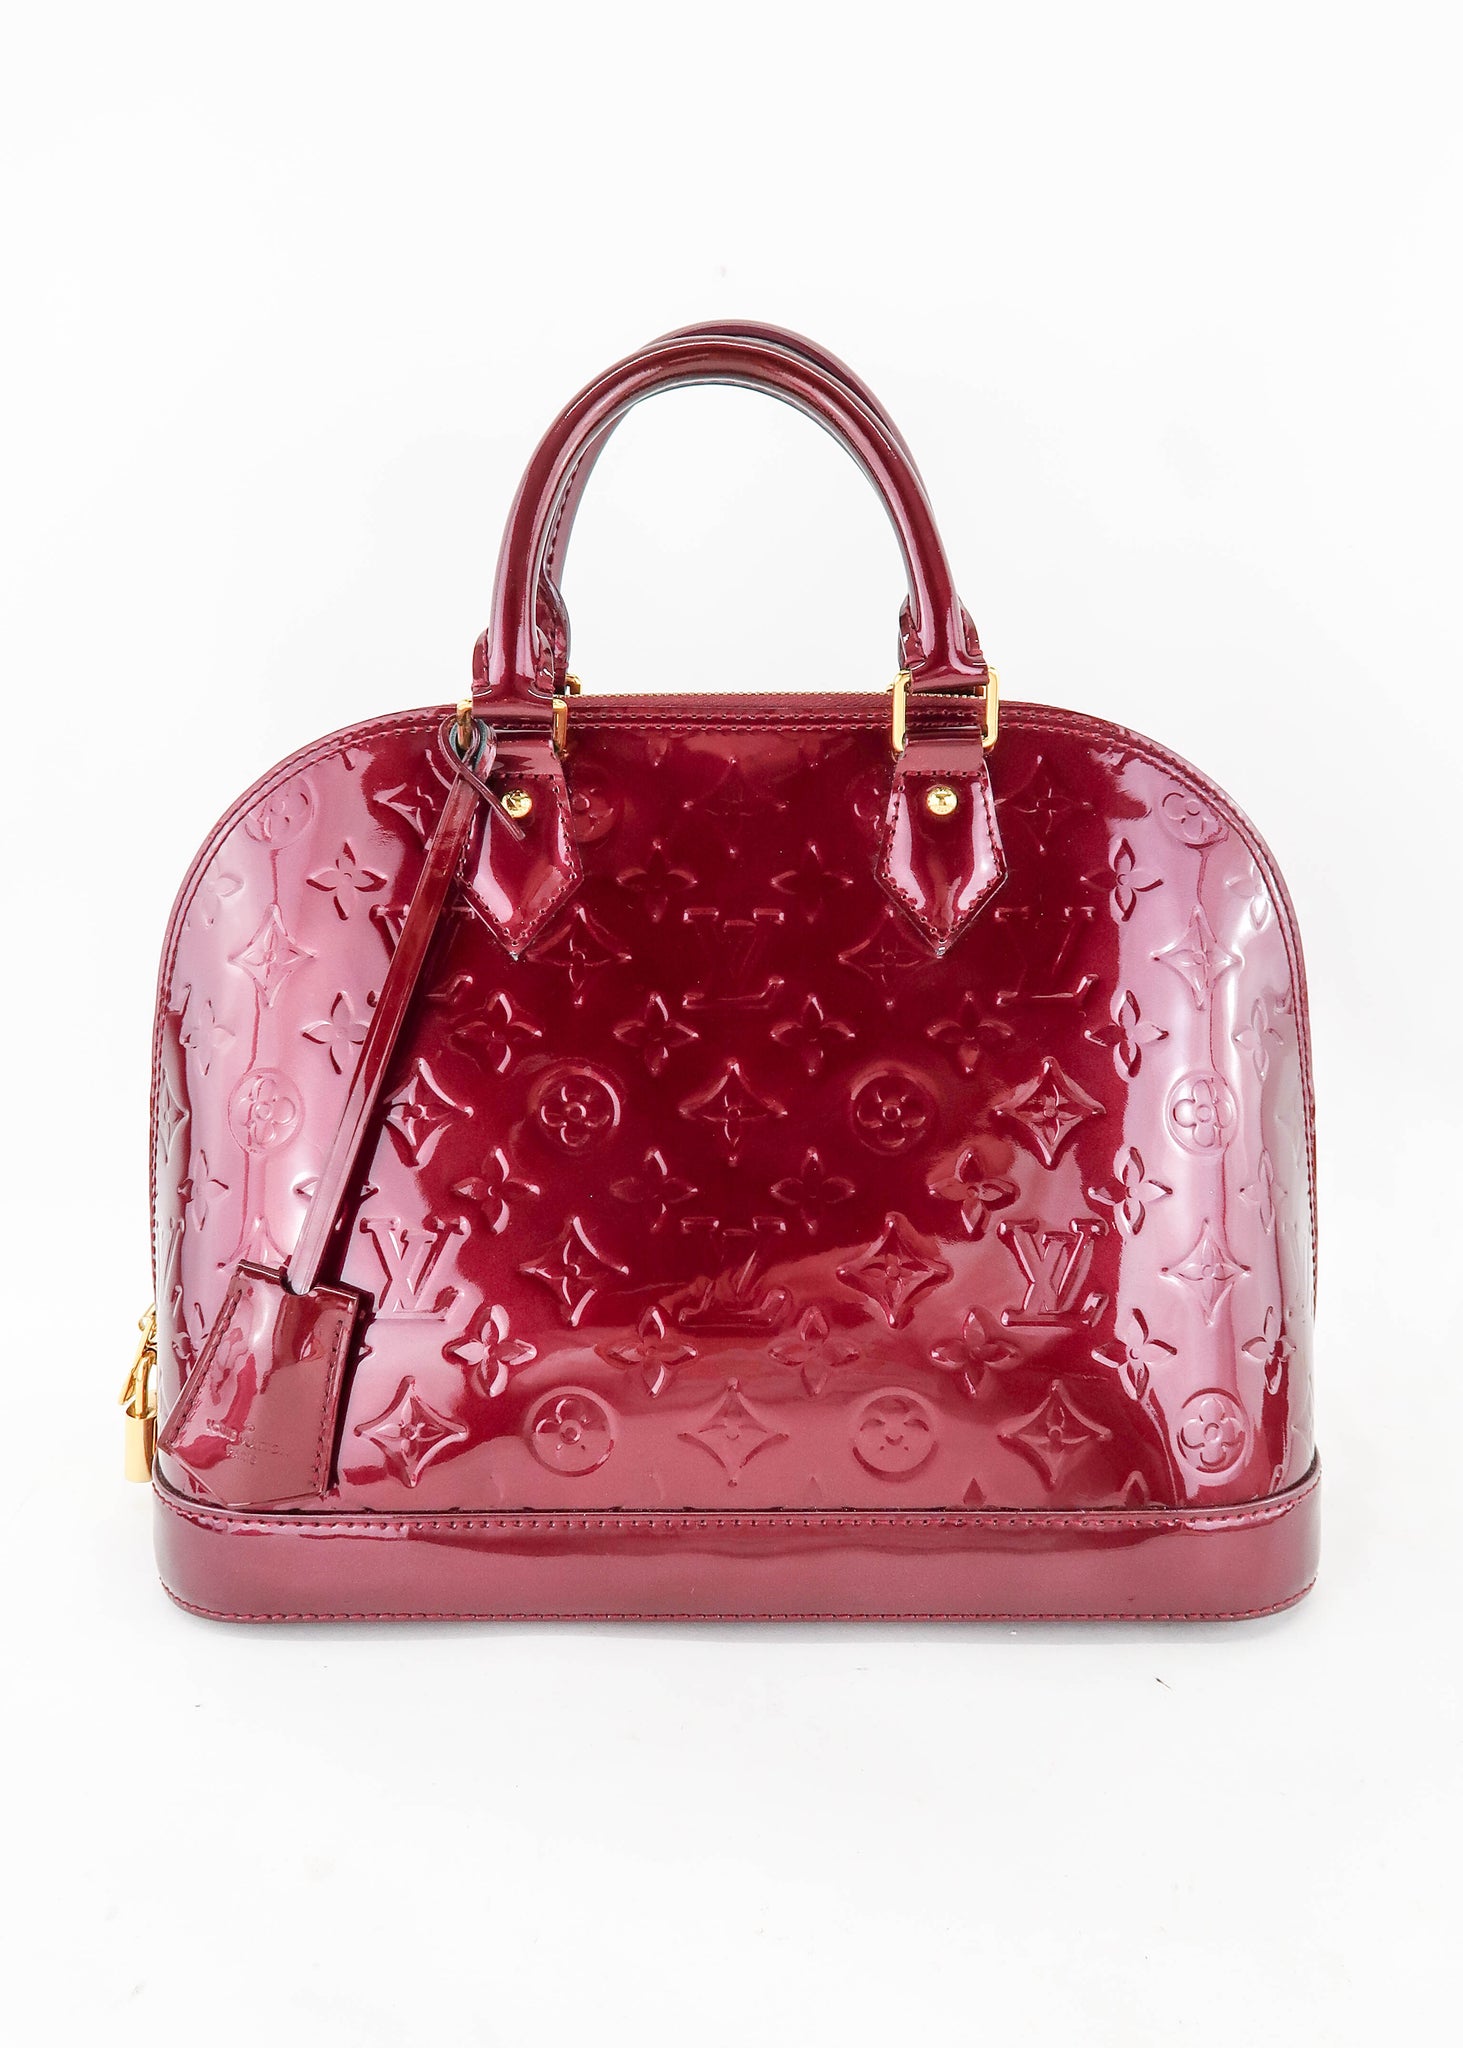 Pre-Owned Louis Vuitton Alma PM Red 